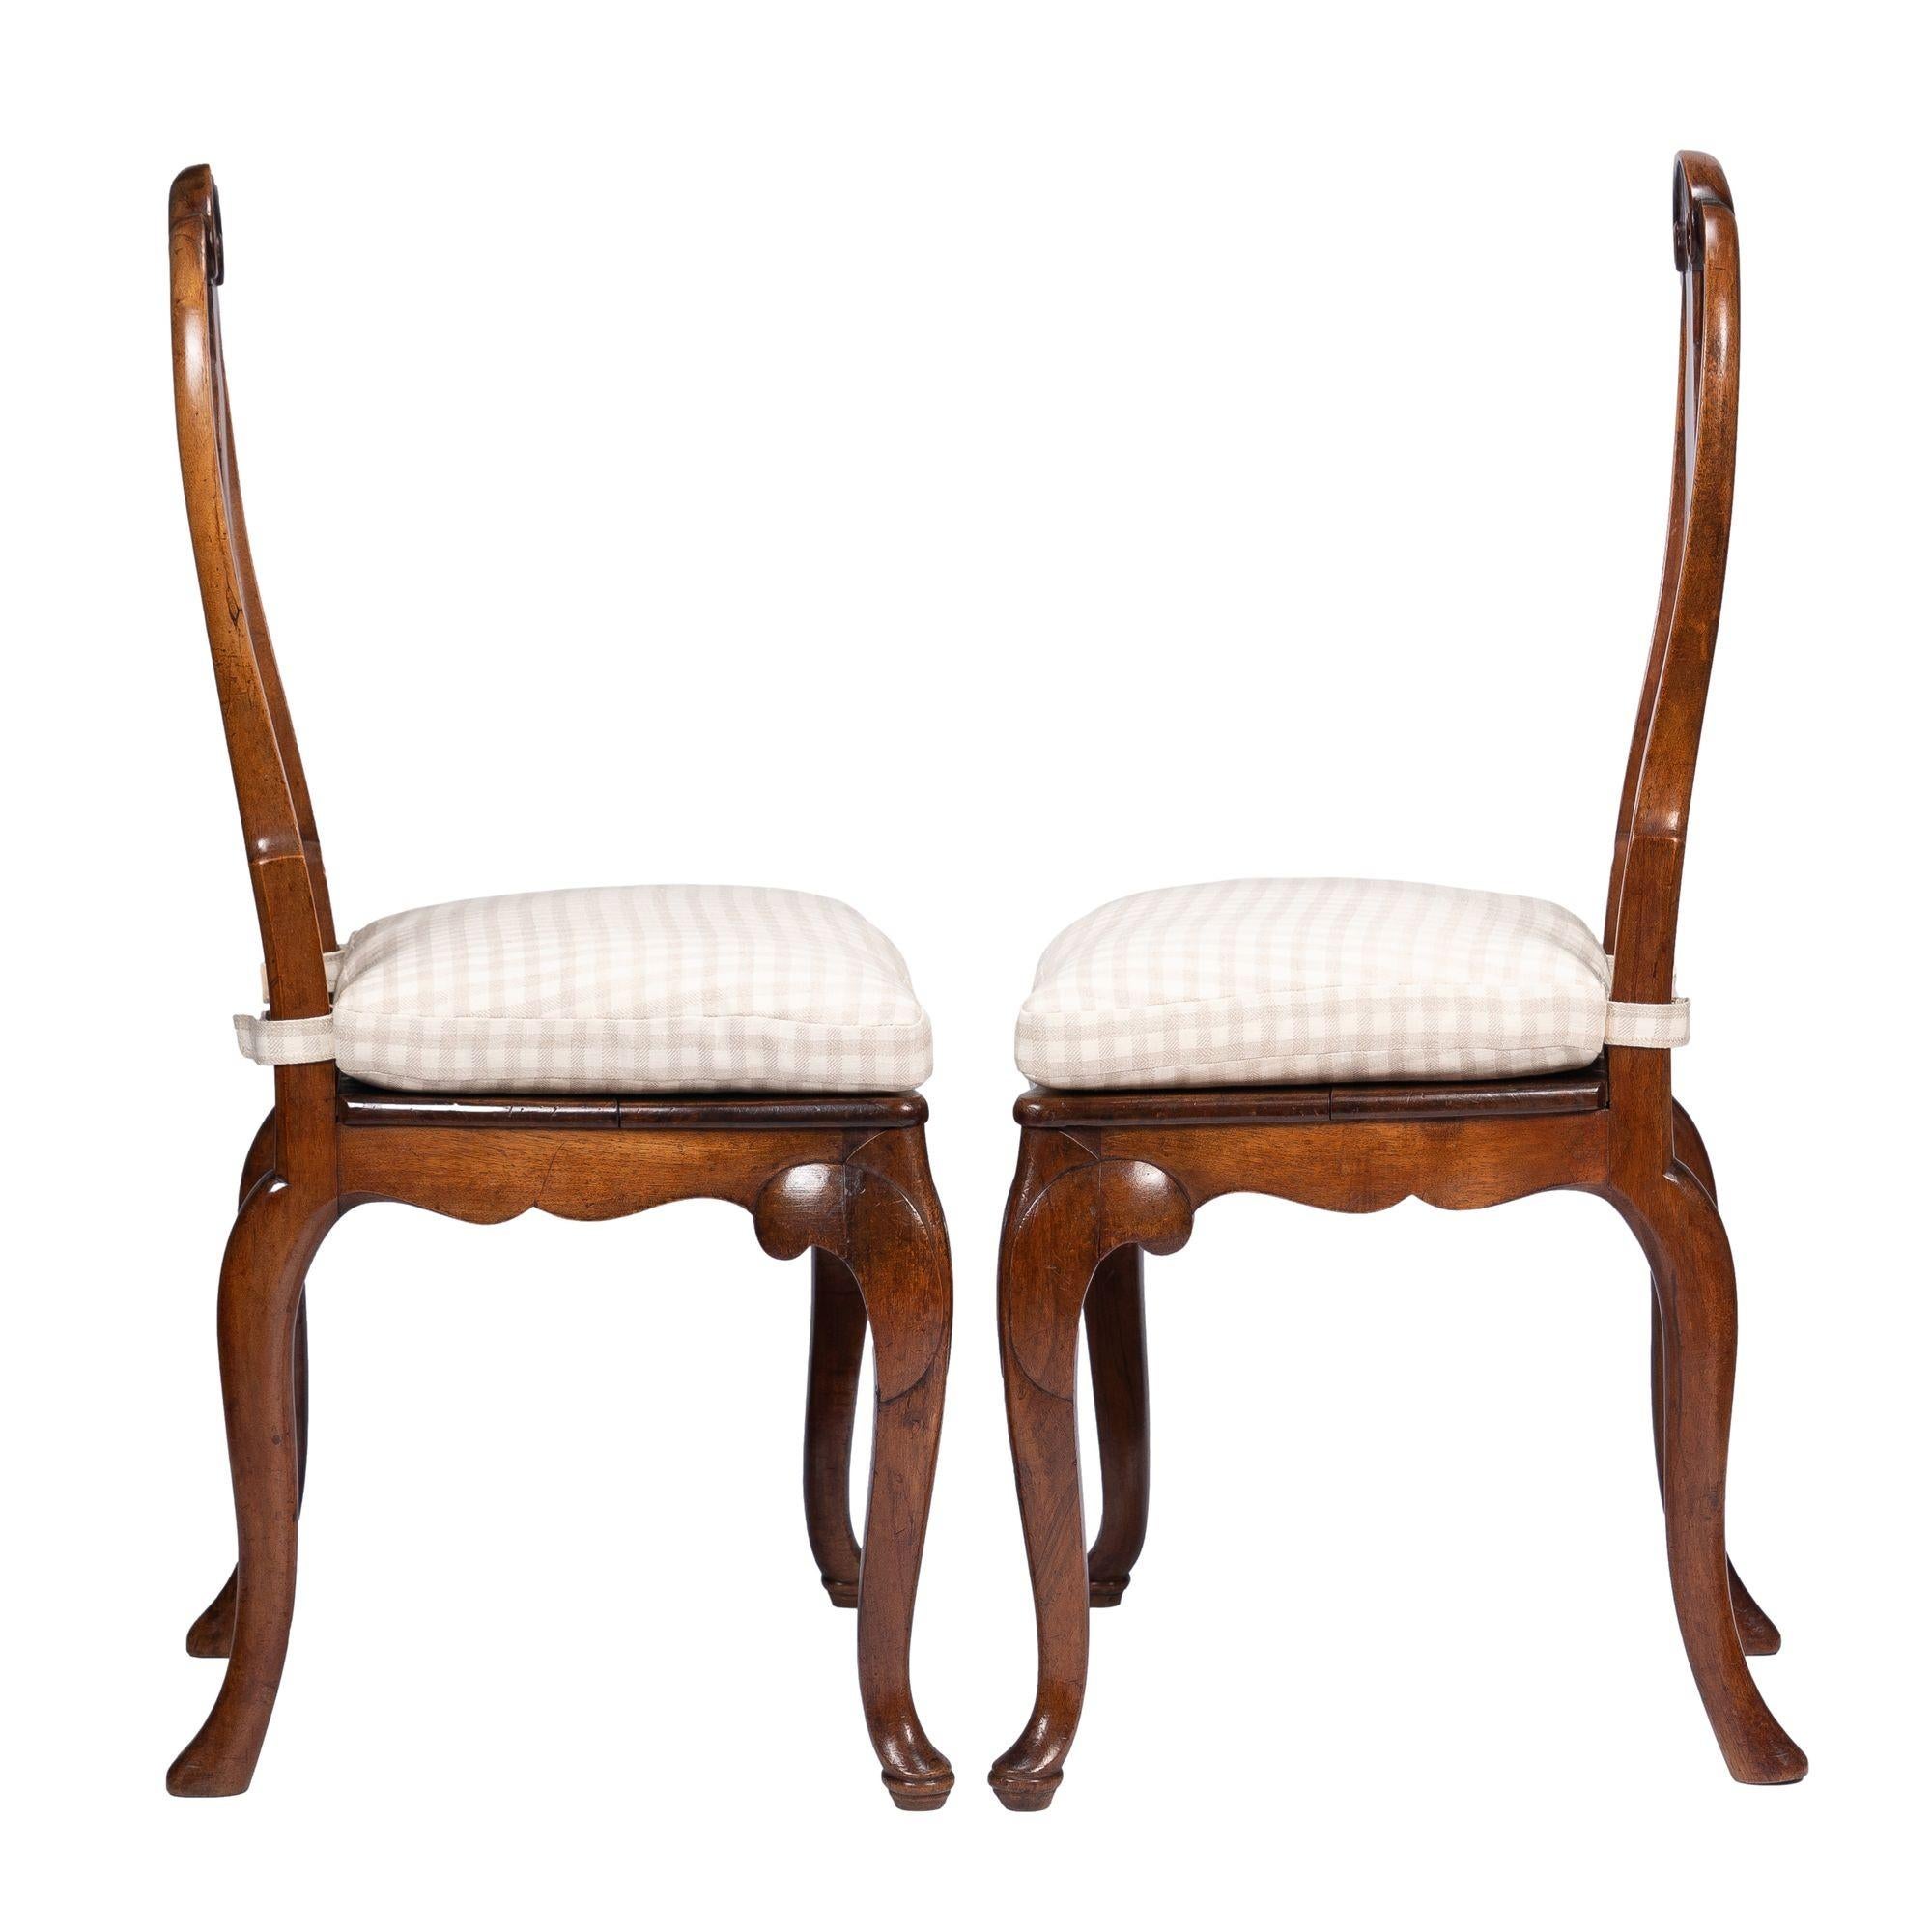 19th Century Pair of French Louis XV Walnut Plank Seat Hall Chairs on Cabriole Legs, 1800s For Sale